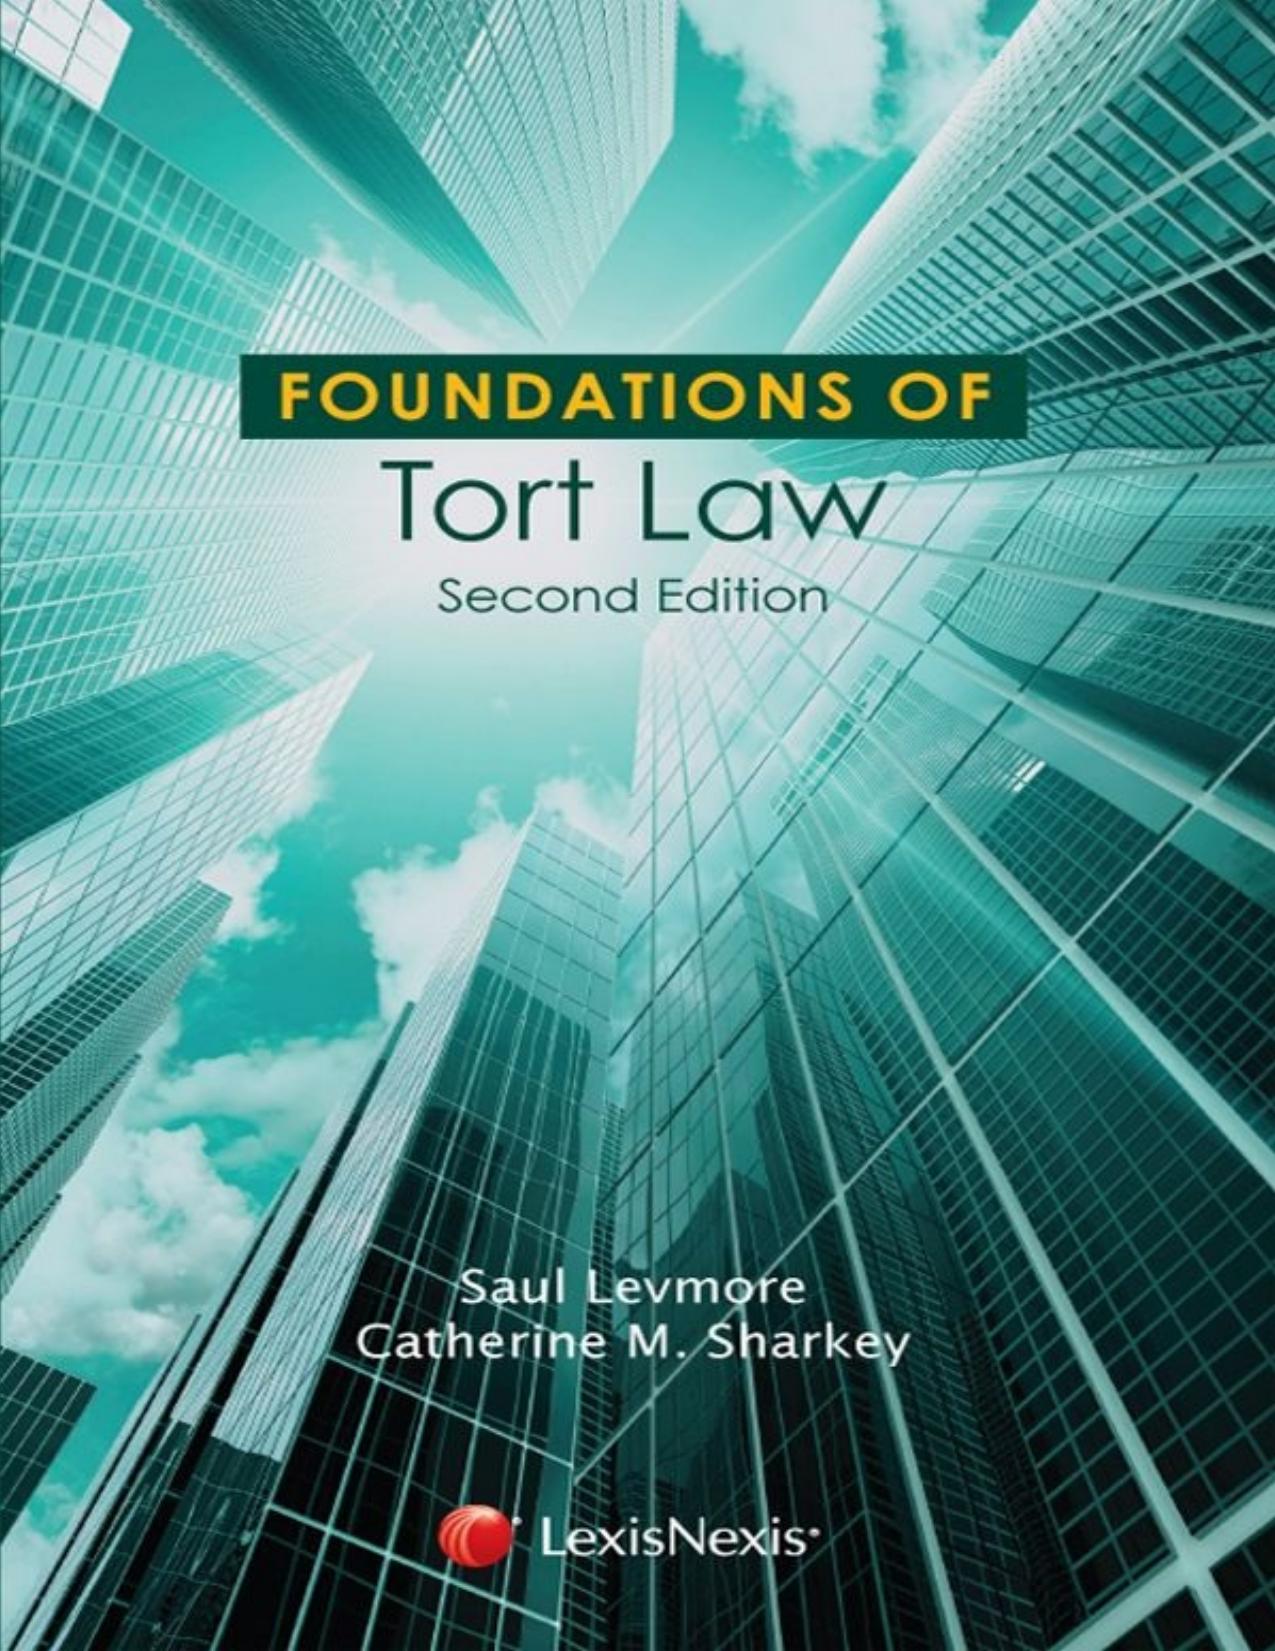 Foundations of Tort Law - PDFDrive.com